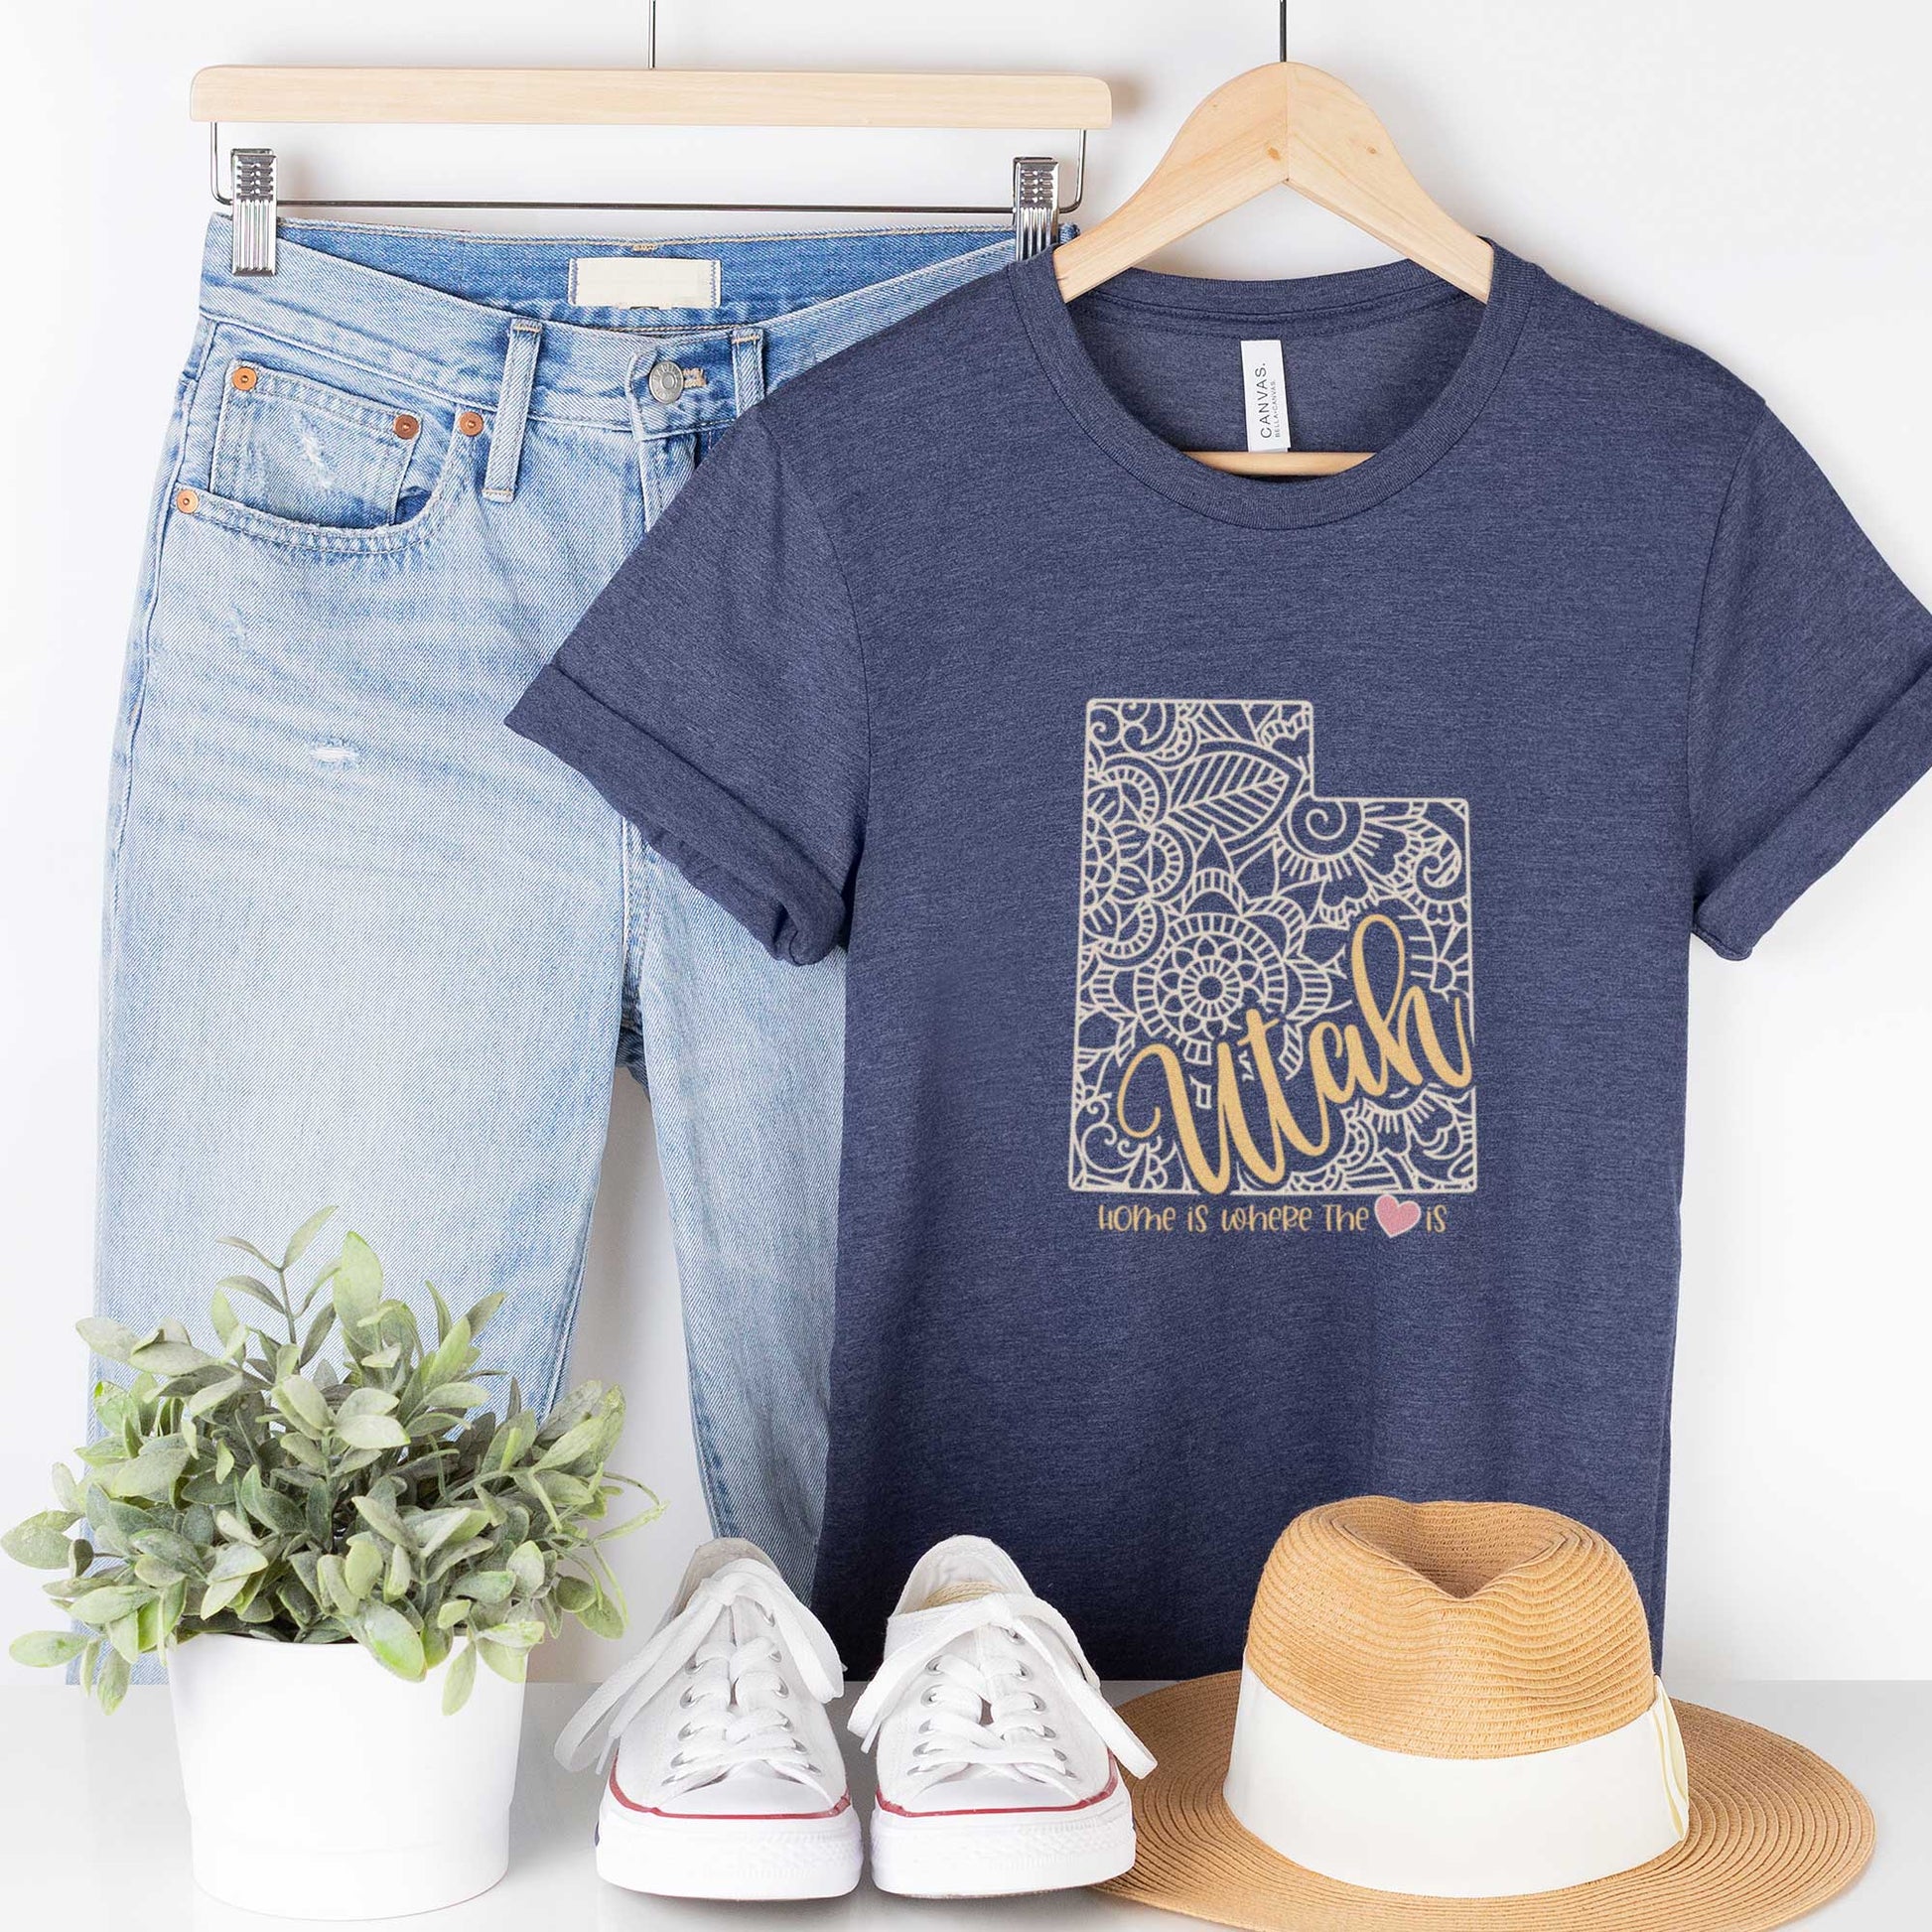 A hanging heather navy Bella Canvas t-shirt featuring a mandala in the shape of Utah with the words home is where the heart is.